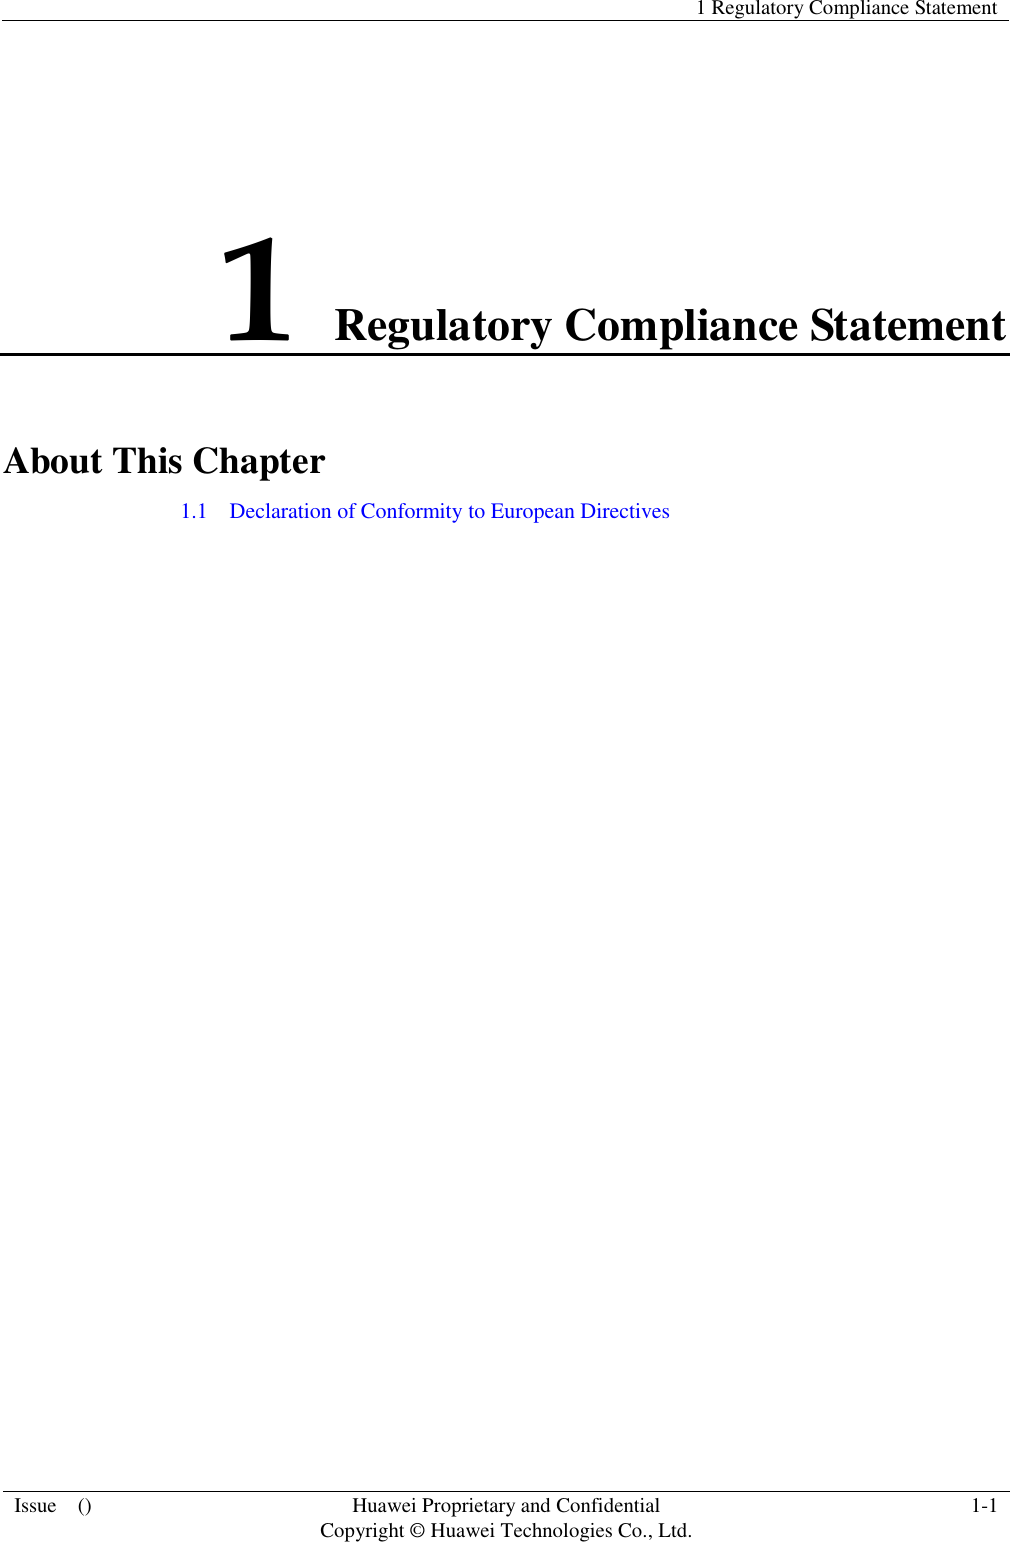   1 Regulatory Compliance Statement  Issue    () Huawei Proprietary and Confidential                                     Copyright © Huawei Technologies Co., Ltd. 1-1  1 Regulatory Compliance Statement About This Chapter 1.1    Declaration of Conformity to European Directives 